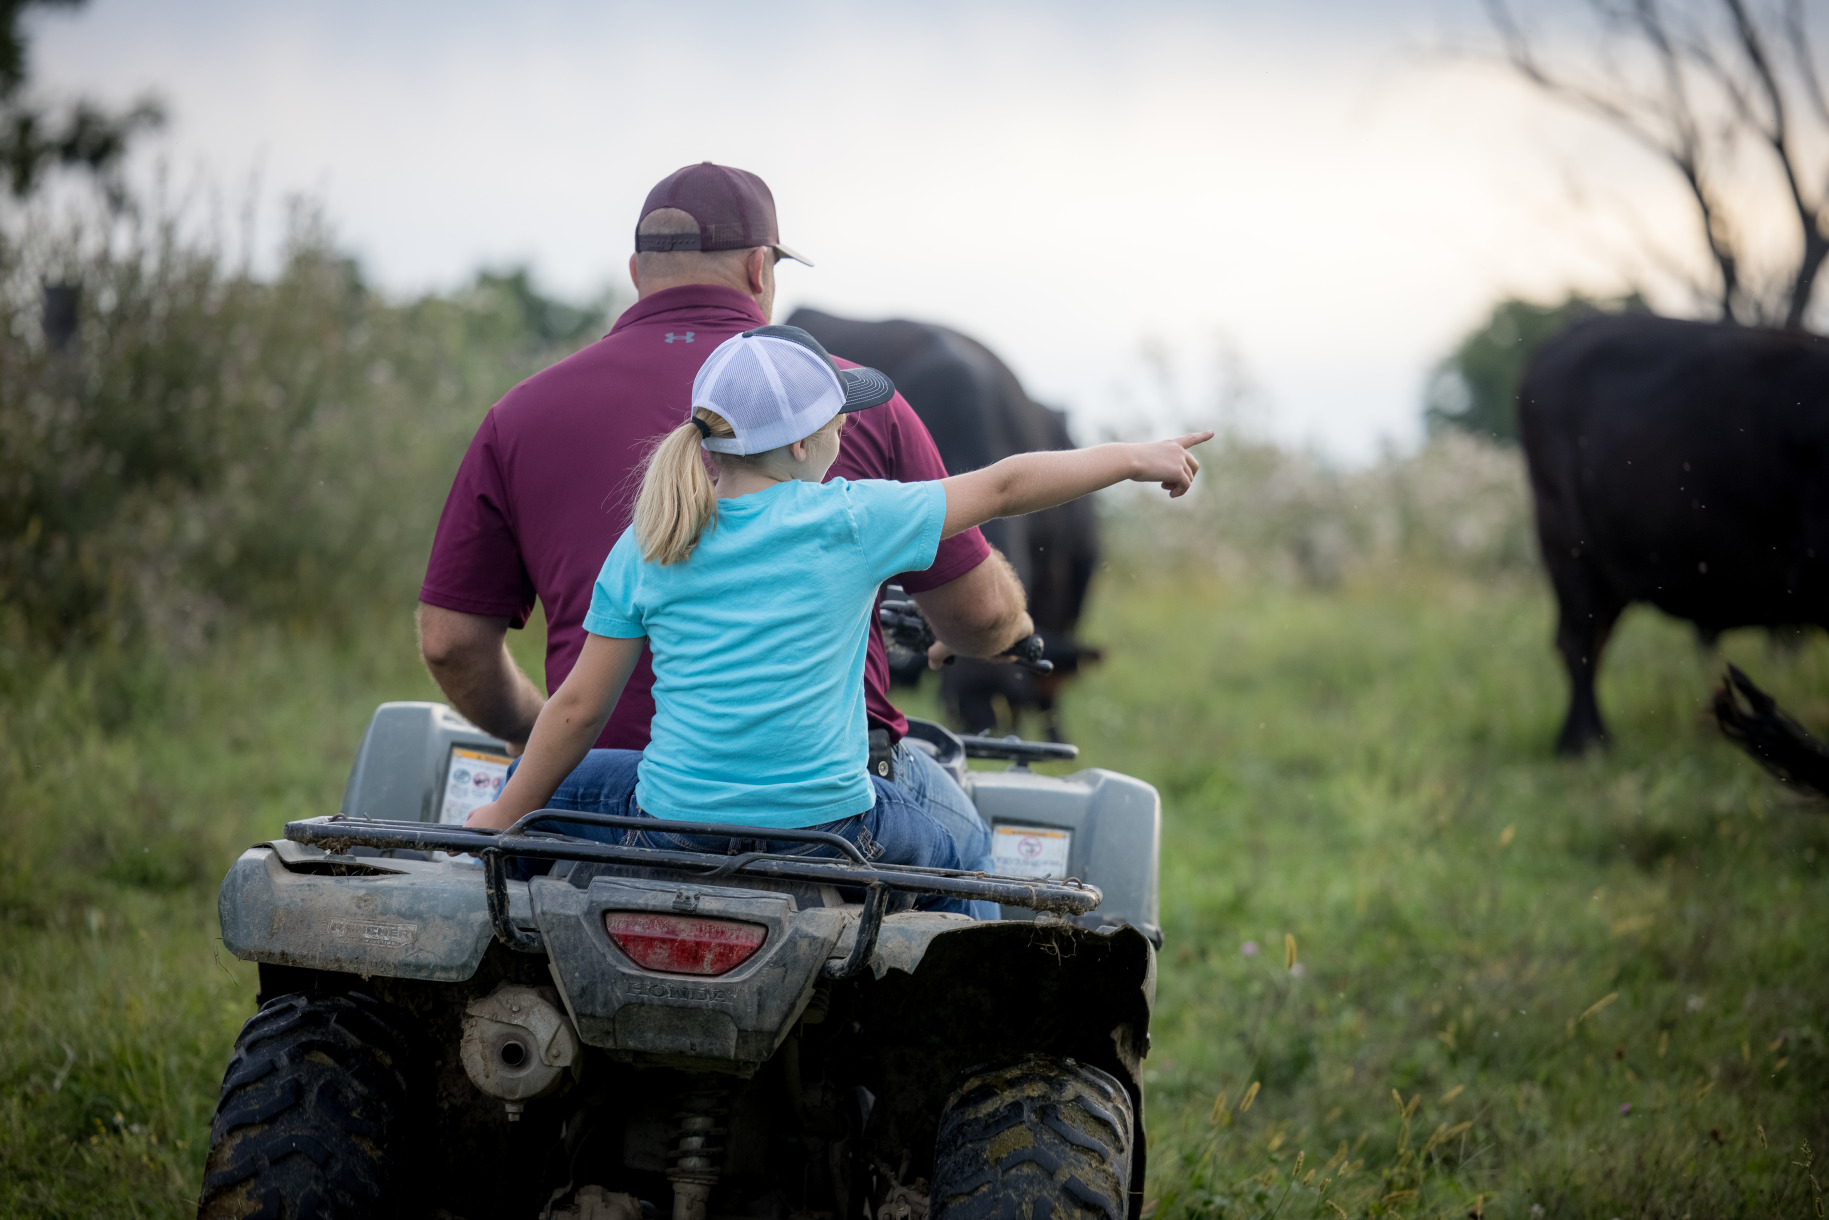 Young girl riding on the back of four wheeler with man in cattle field - Zoetis